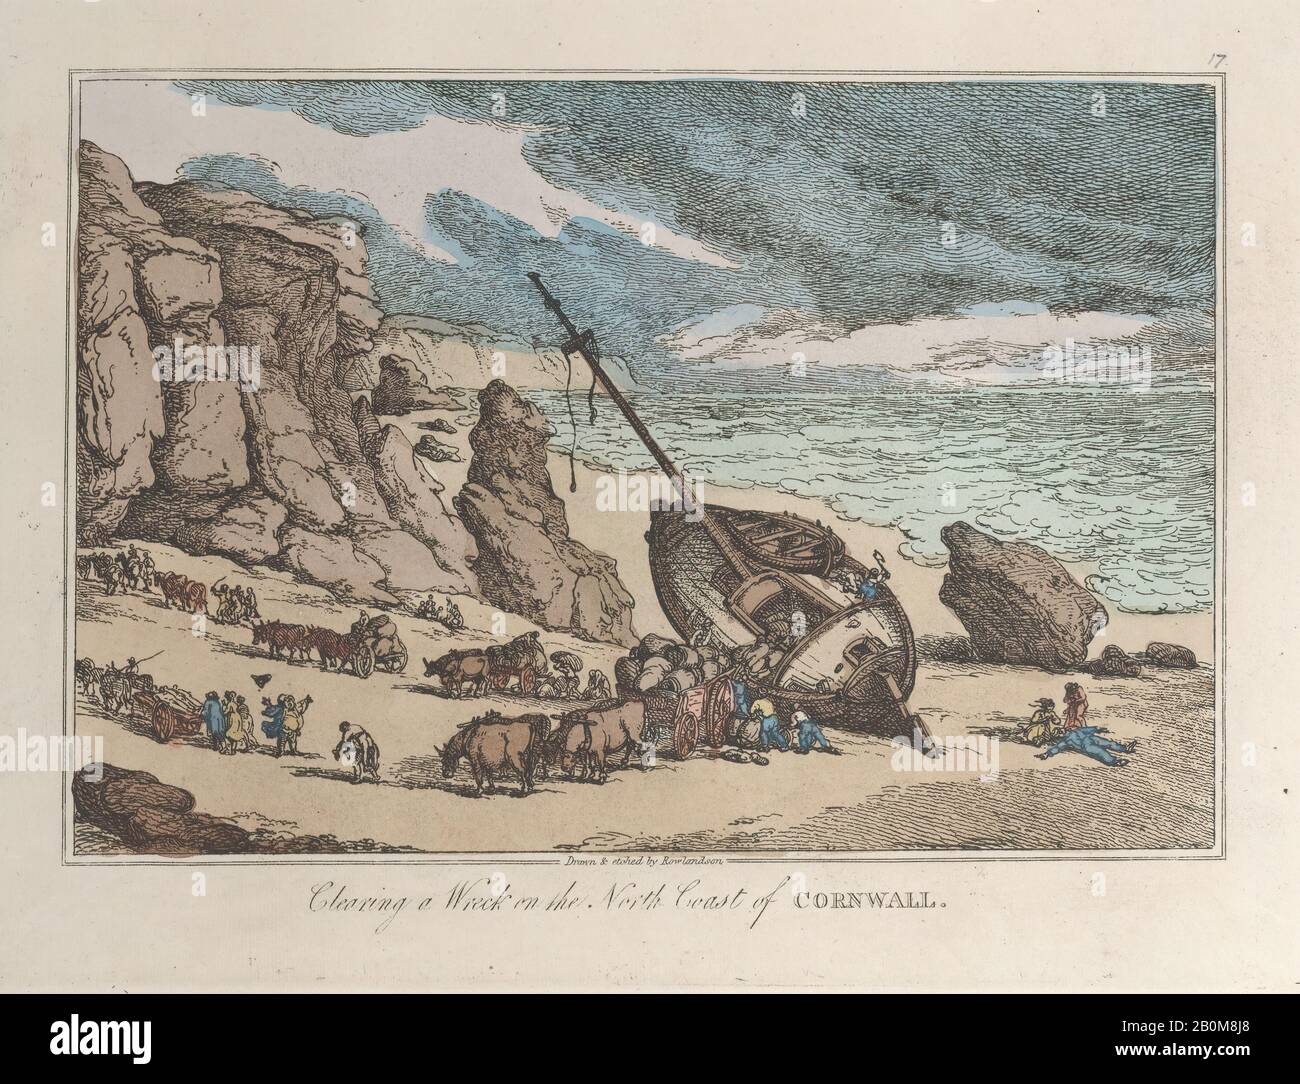 Thomas Rowlandson, Clearing a Wreck on the North Coast of Cornwall, from "Sketches from Nature", "Sketches from Nature", Thomas Rowlandson (British, London 1757-187 London), 1822, Handkolorierte Radierung, Blatt: 7 1/4 × 9 5/8 in. (18,4 × 24,5 cm), Ausdrucke Stockfoto